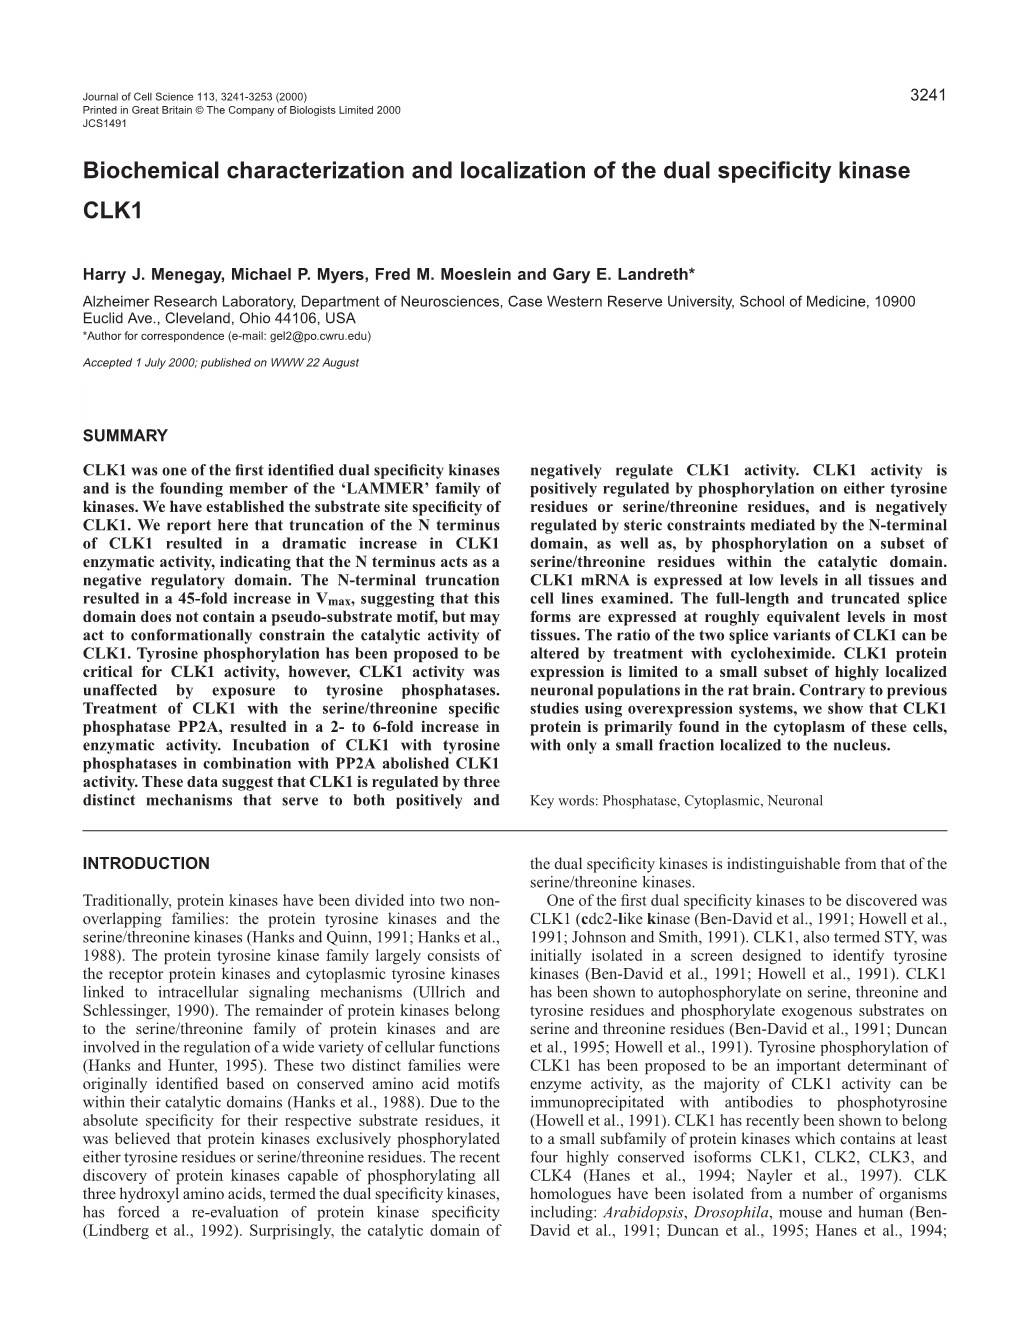 Biochemical Characterization and Localization of the Dual Specificity